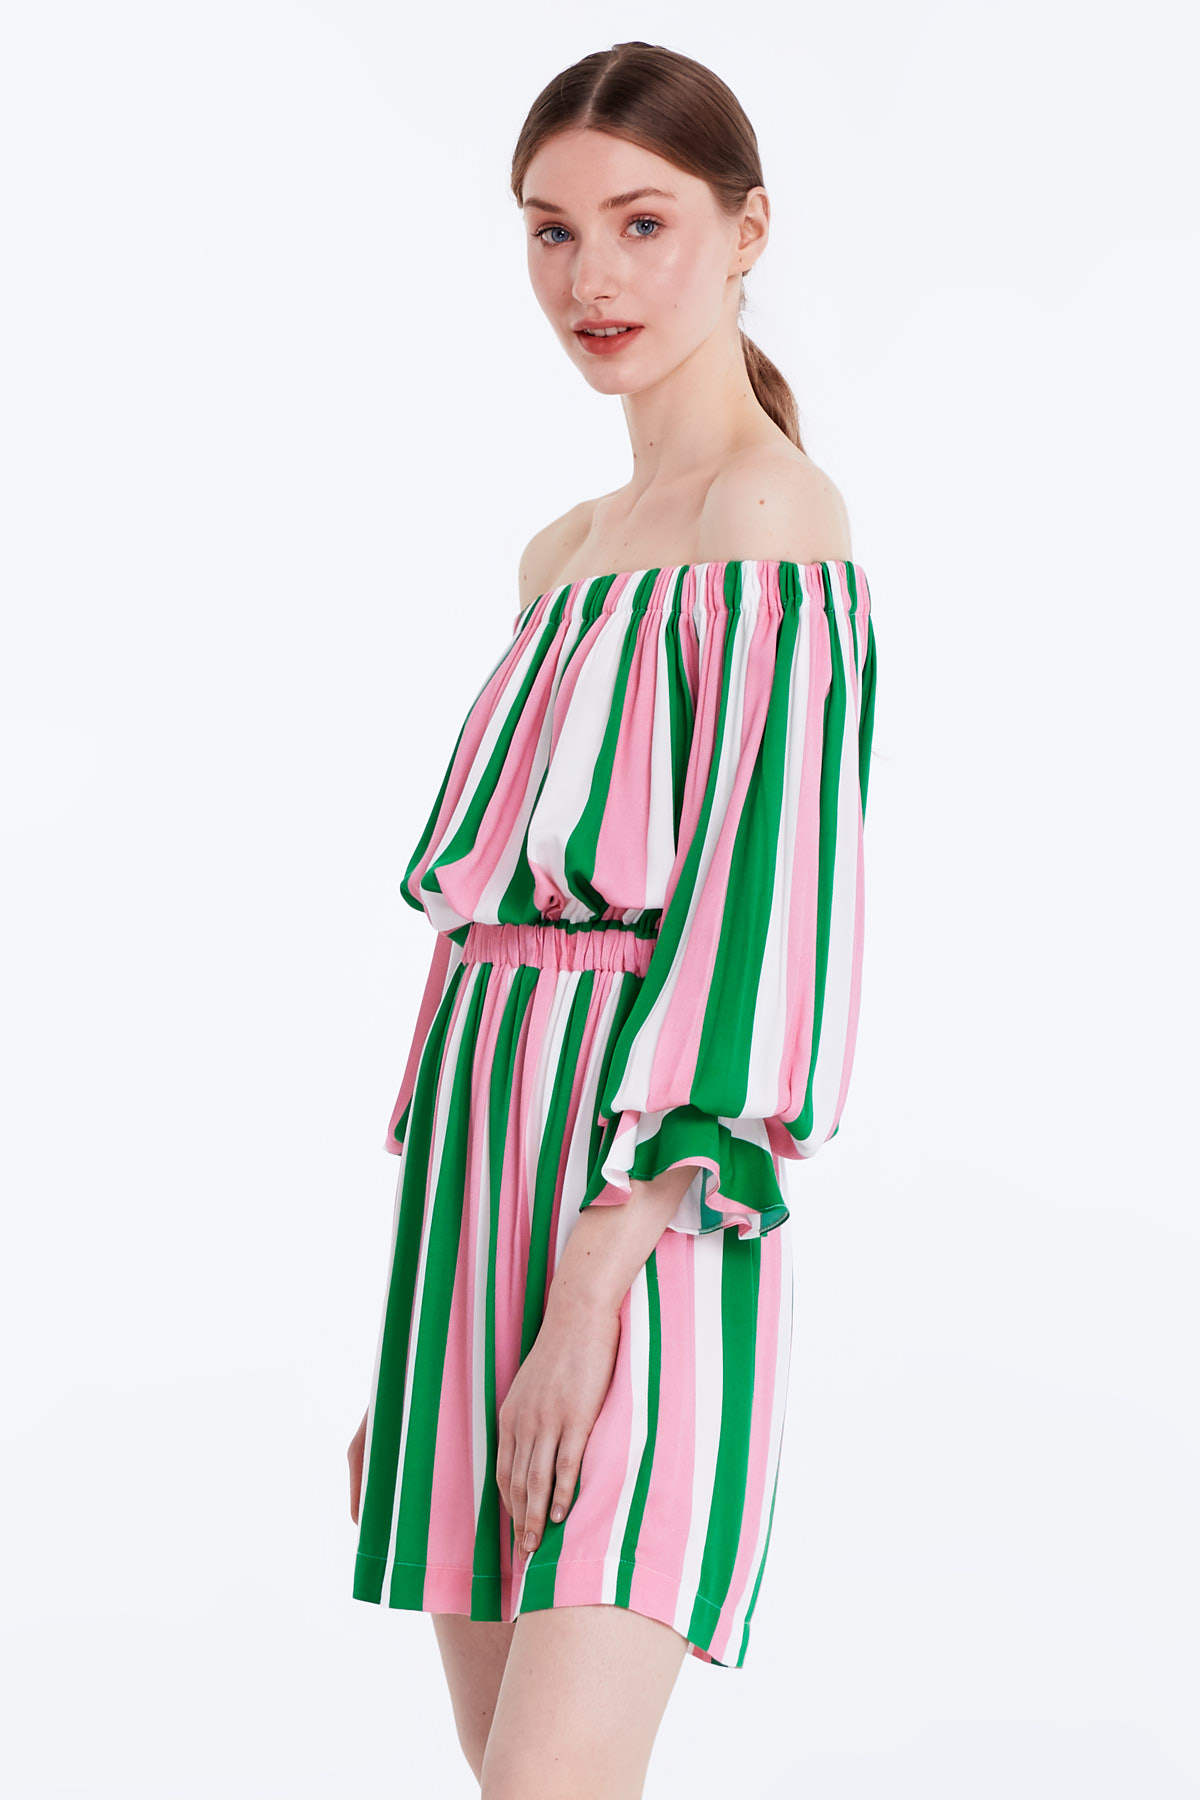 Off-shoulder dress with white, green and pink stripes, photo 3